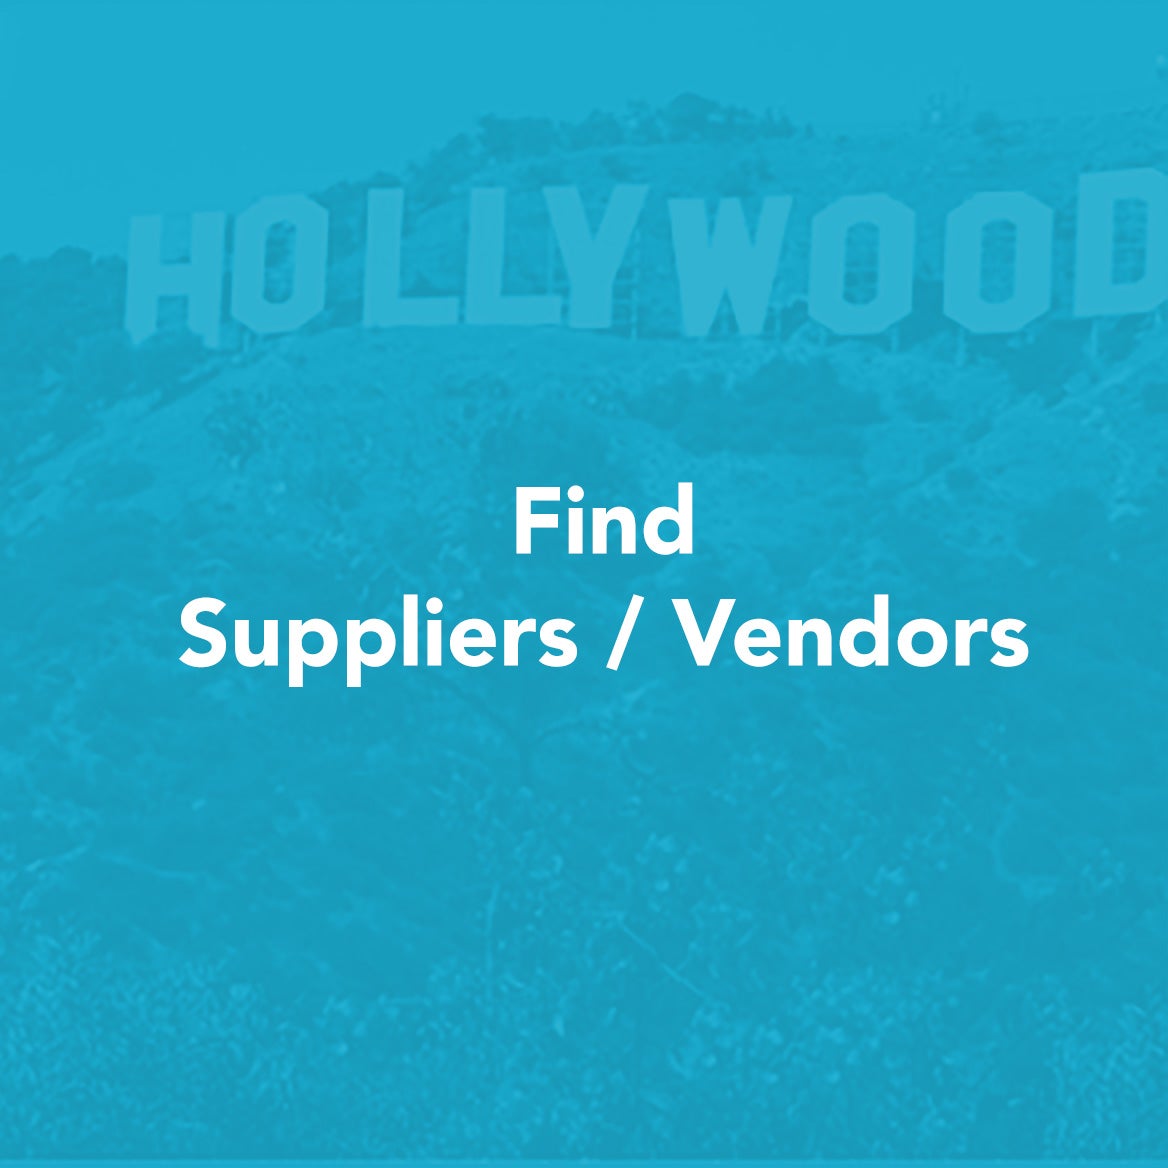 Find Suppliers / Vendors